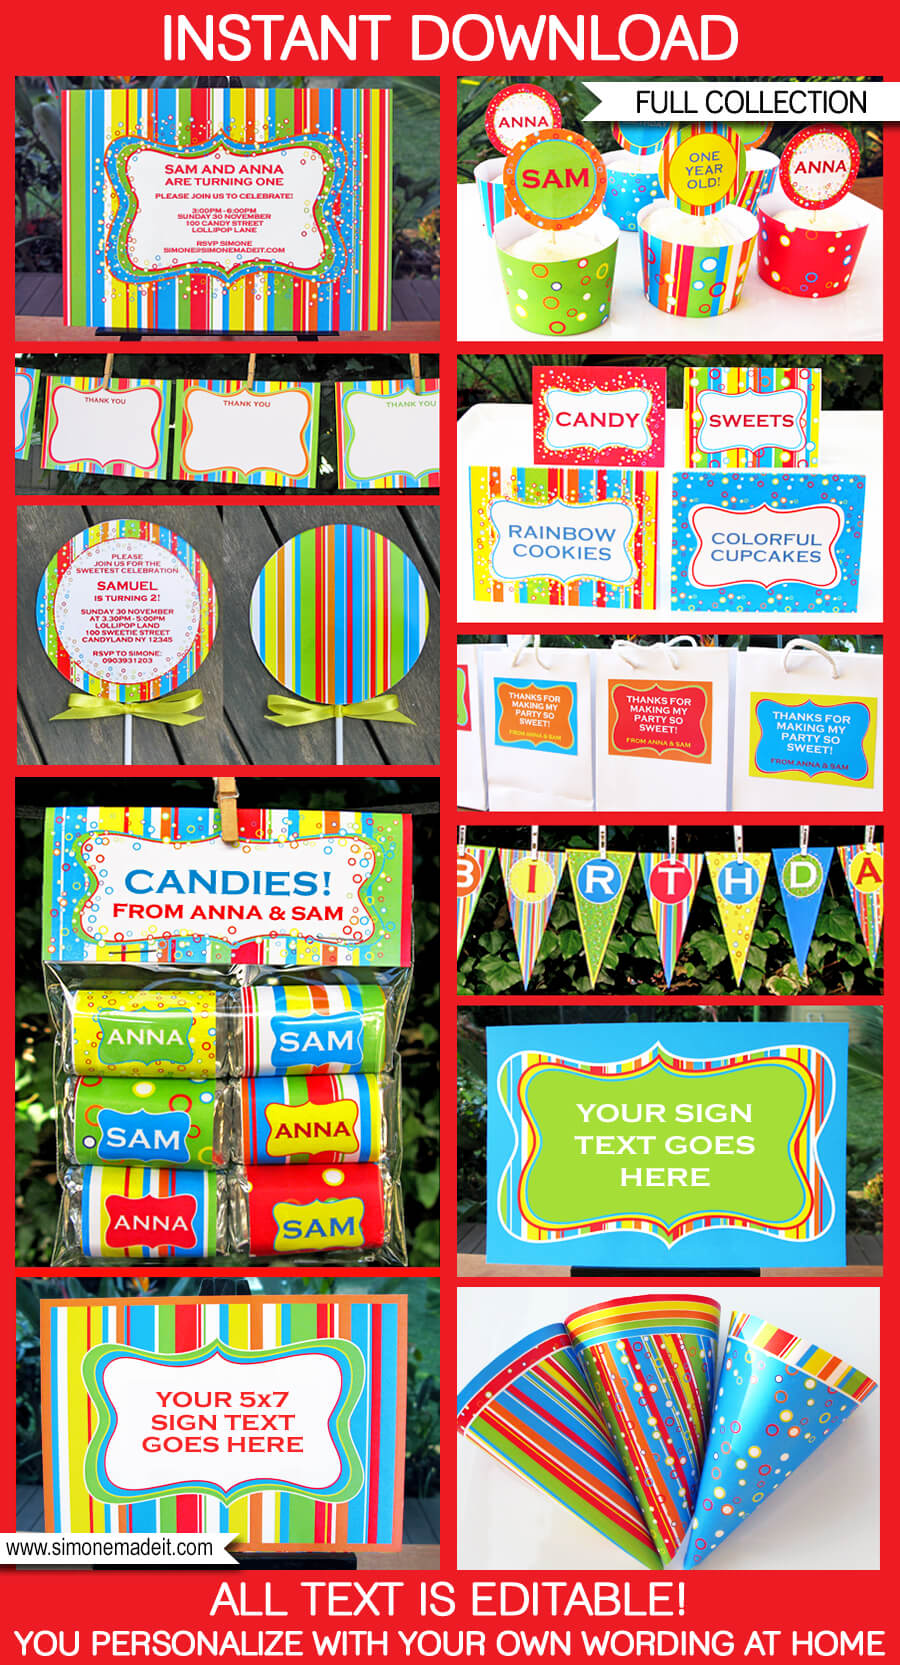 Lollipop Party Printables, Invitations & Decorations | Candyland Party | Sweet Shoppe Party | Editable Birthday Party Theme Templates | INSTANT DOWNLOAD $12.50 via SIMONEmadeit.com